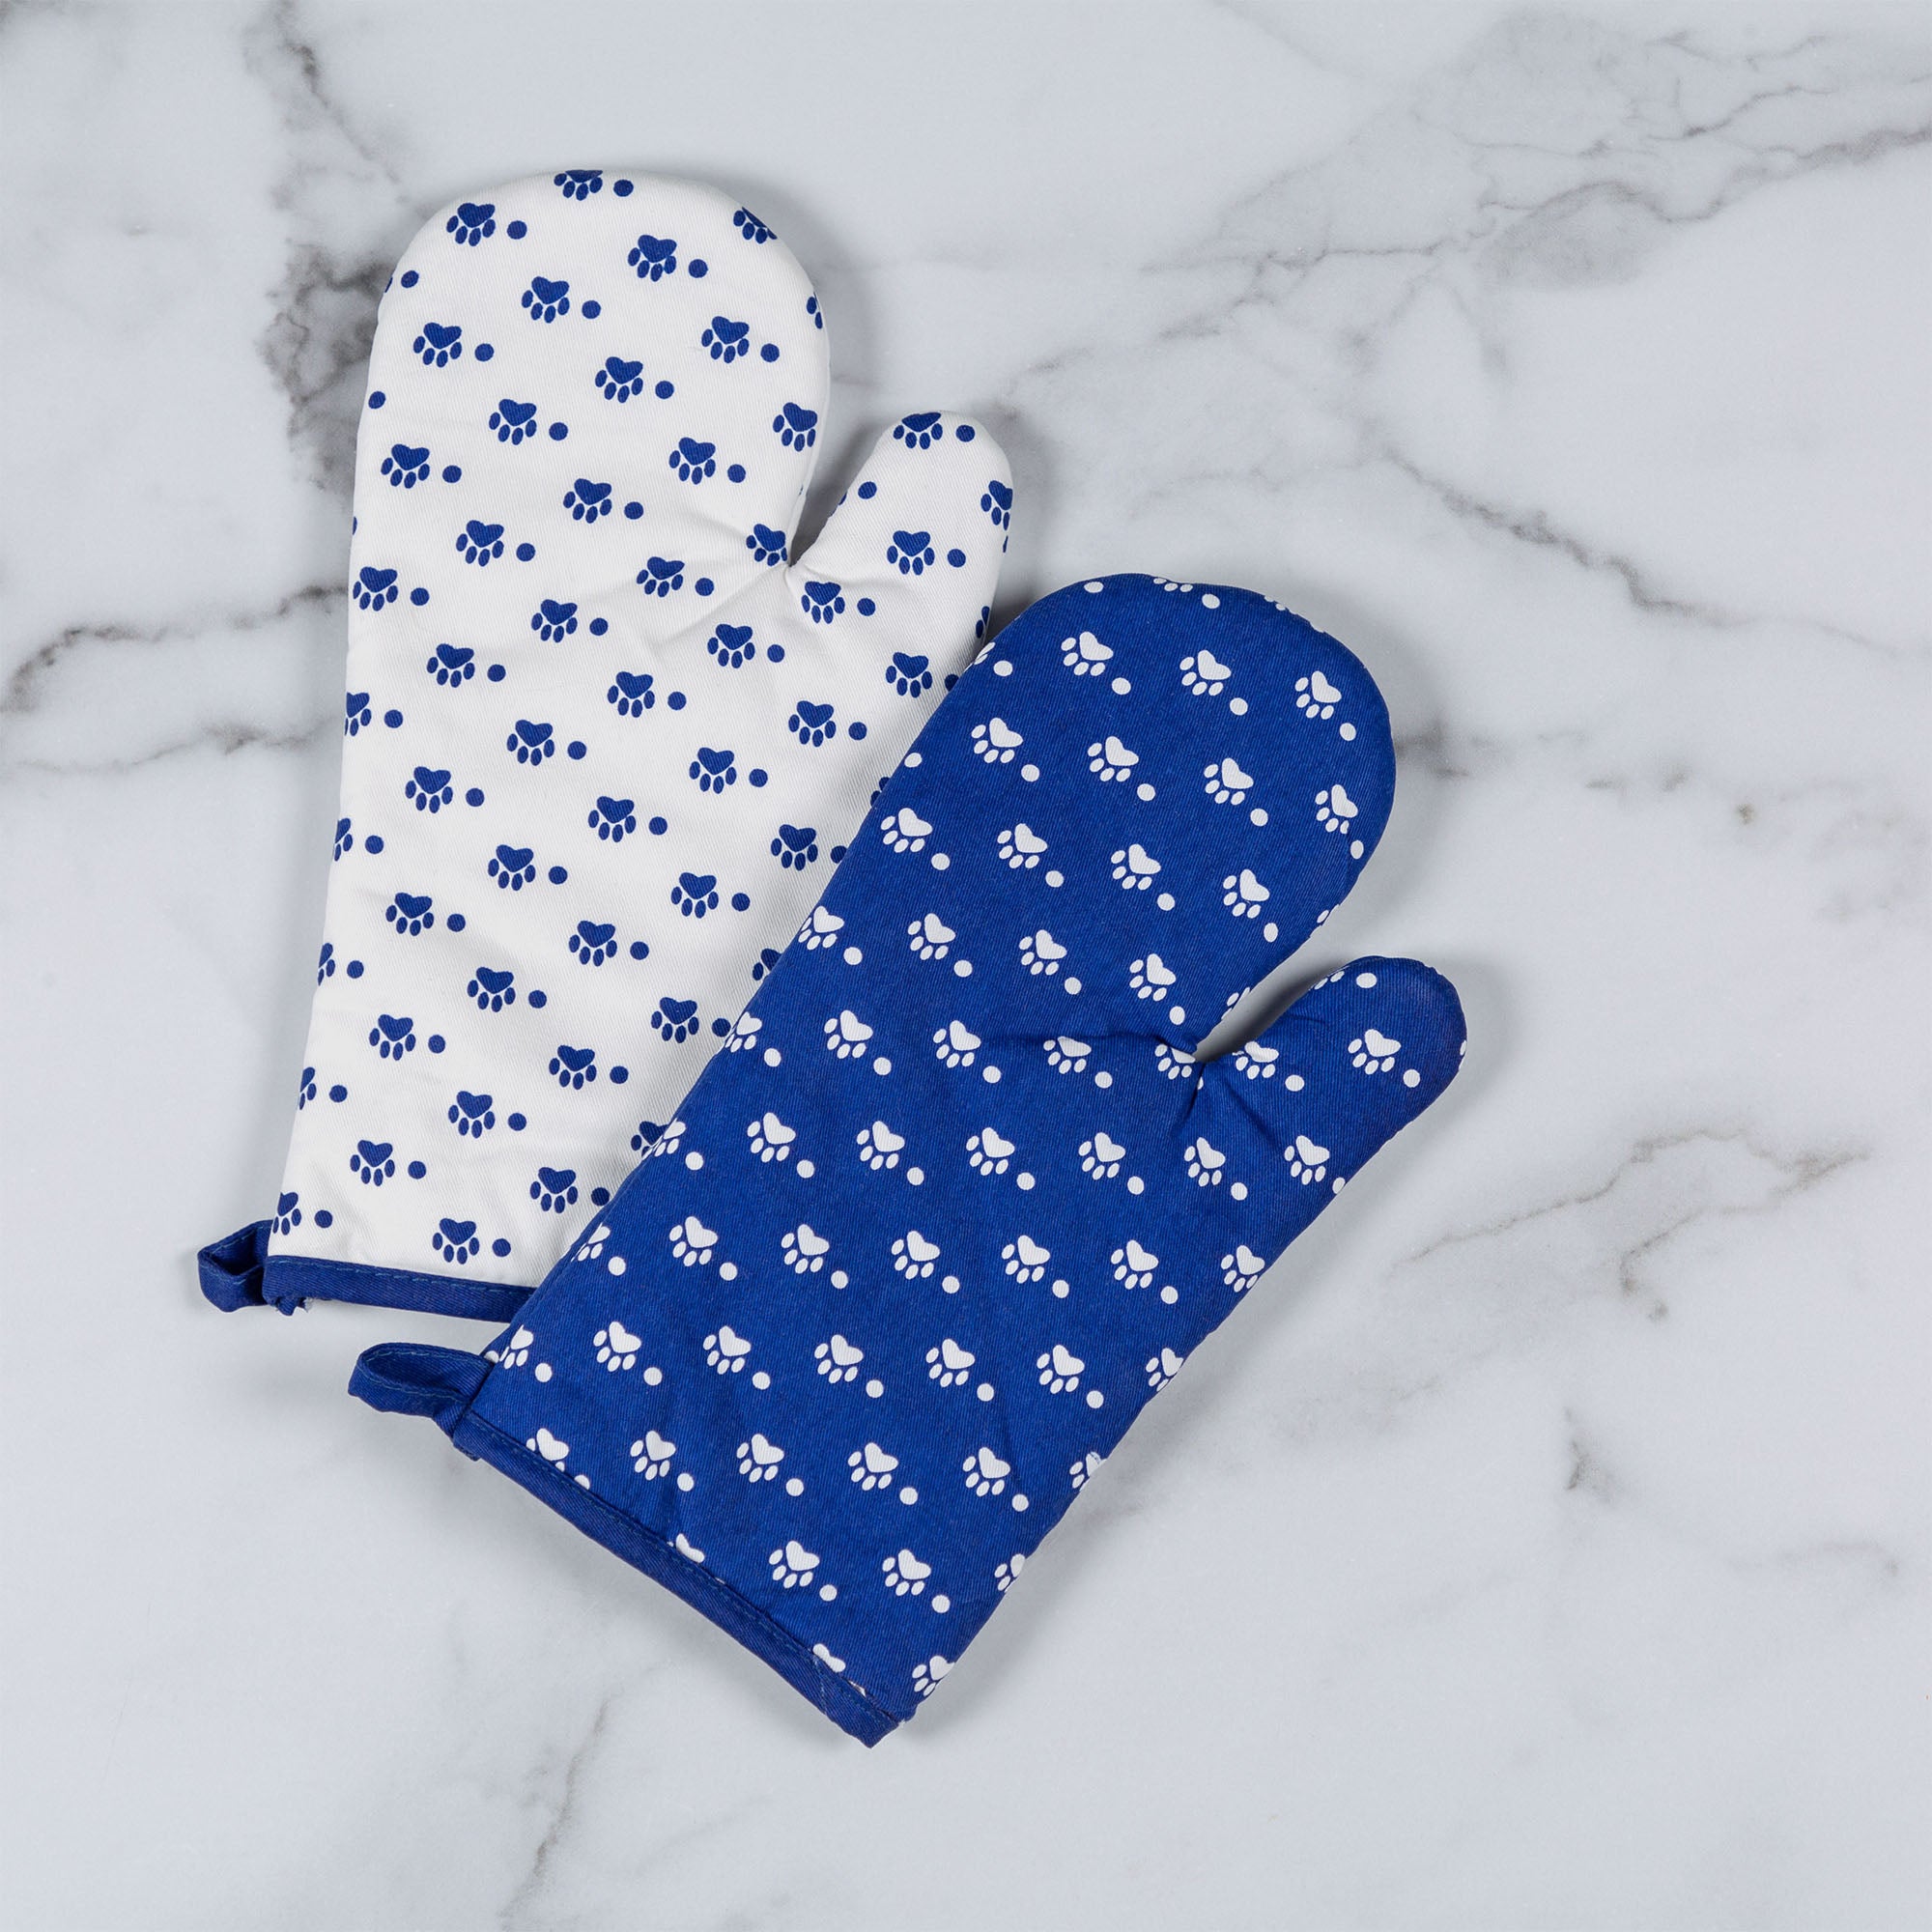 Festival Pets 100% Cotton Oven Mitts , Dog Oven Mitts , Cat Oven Mitts - Paws & Dots - Blue